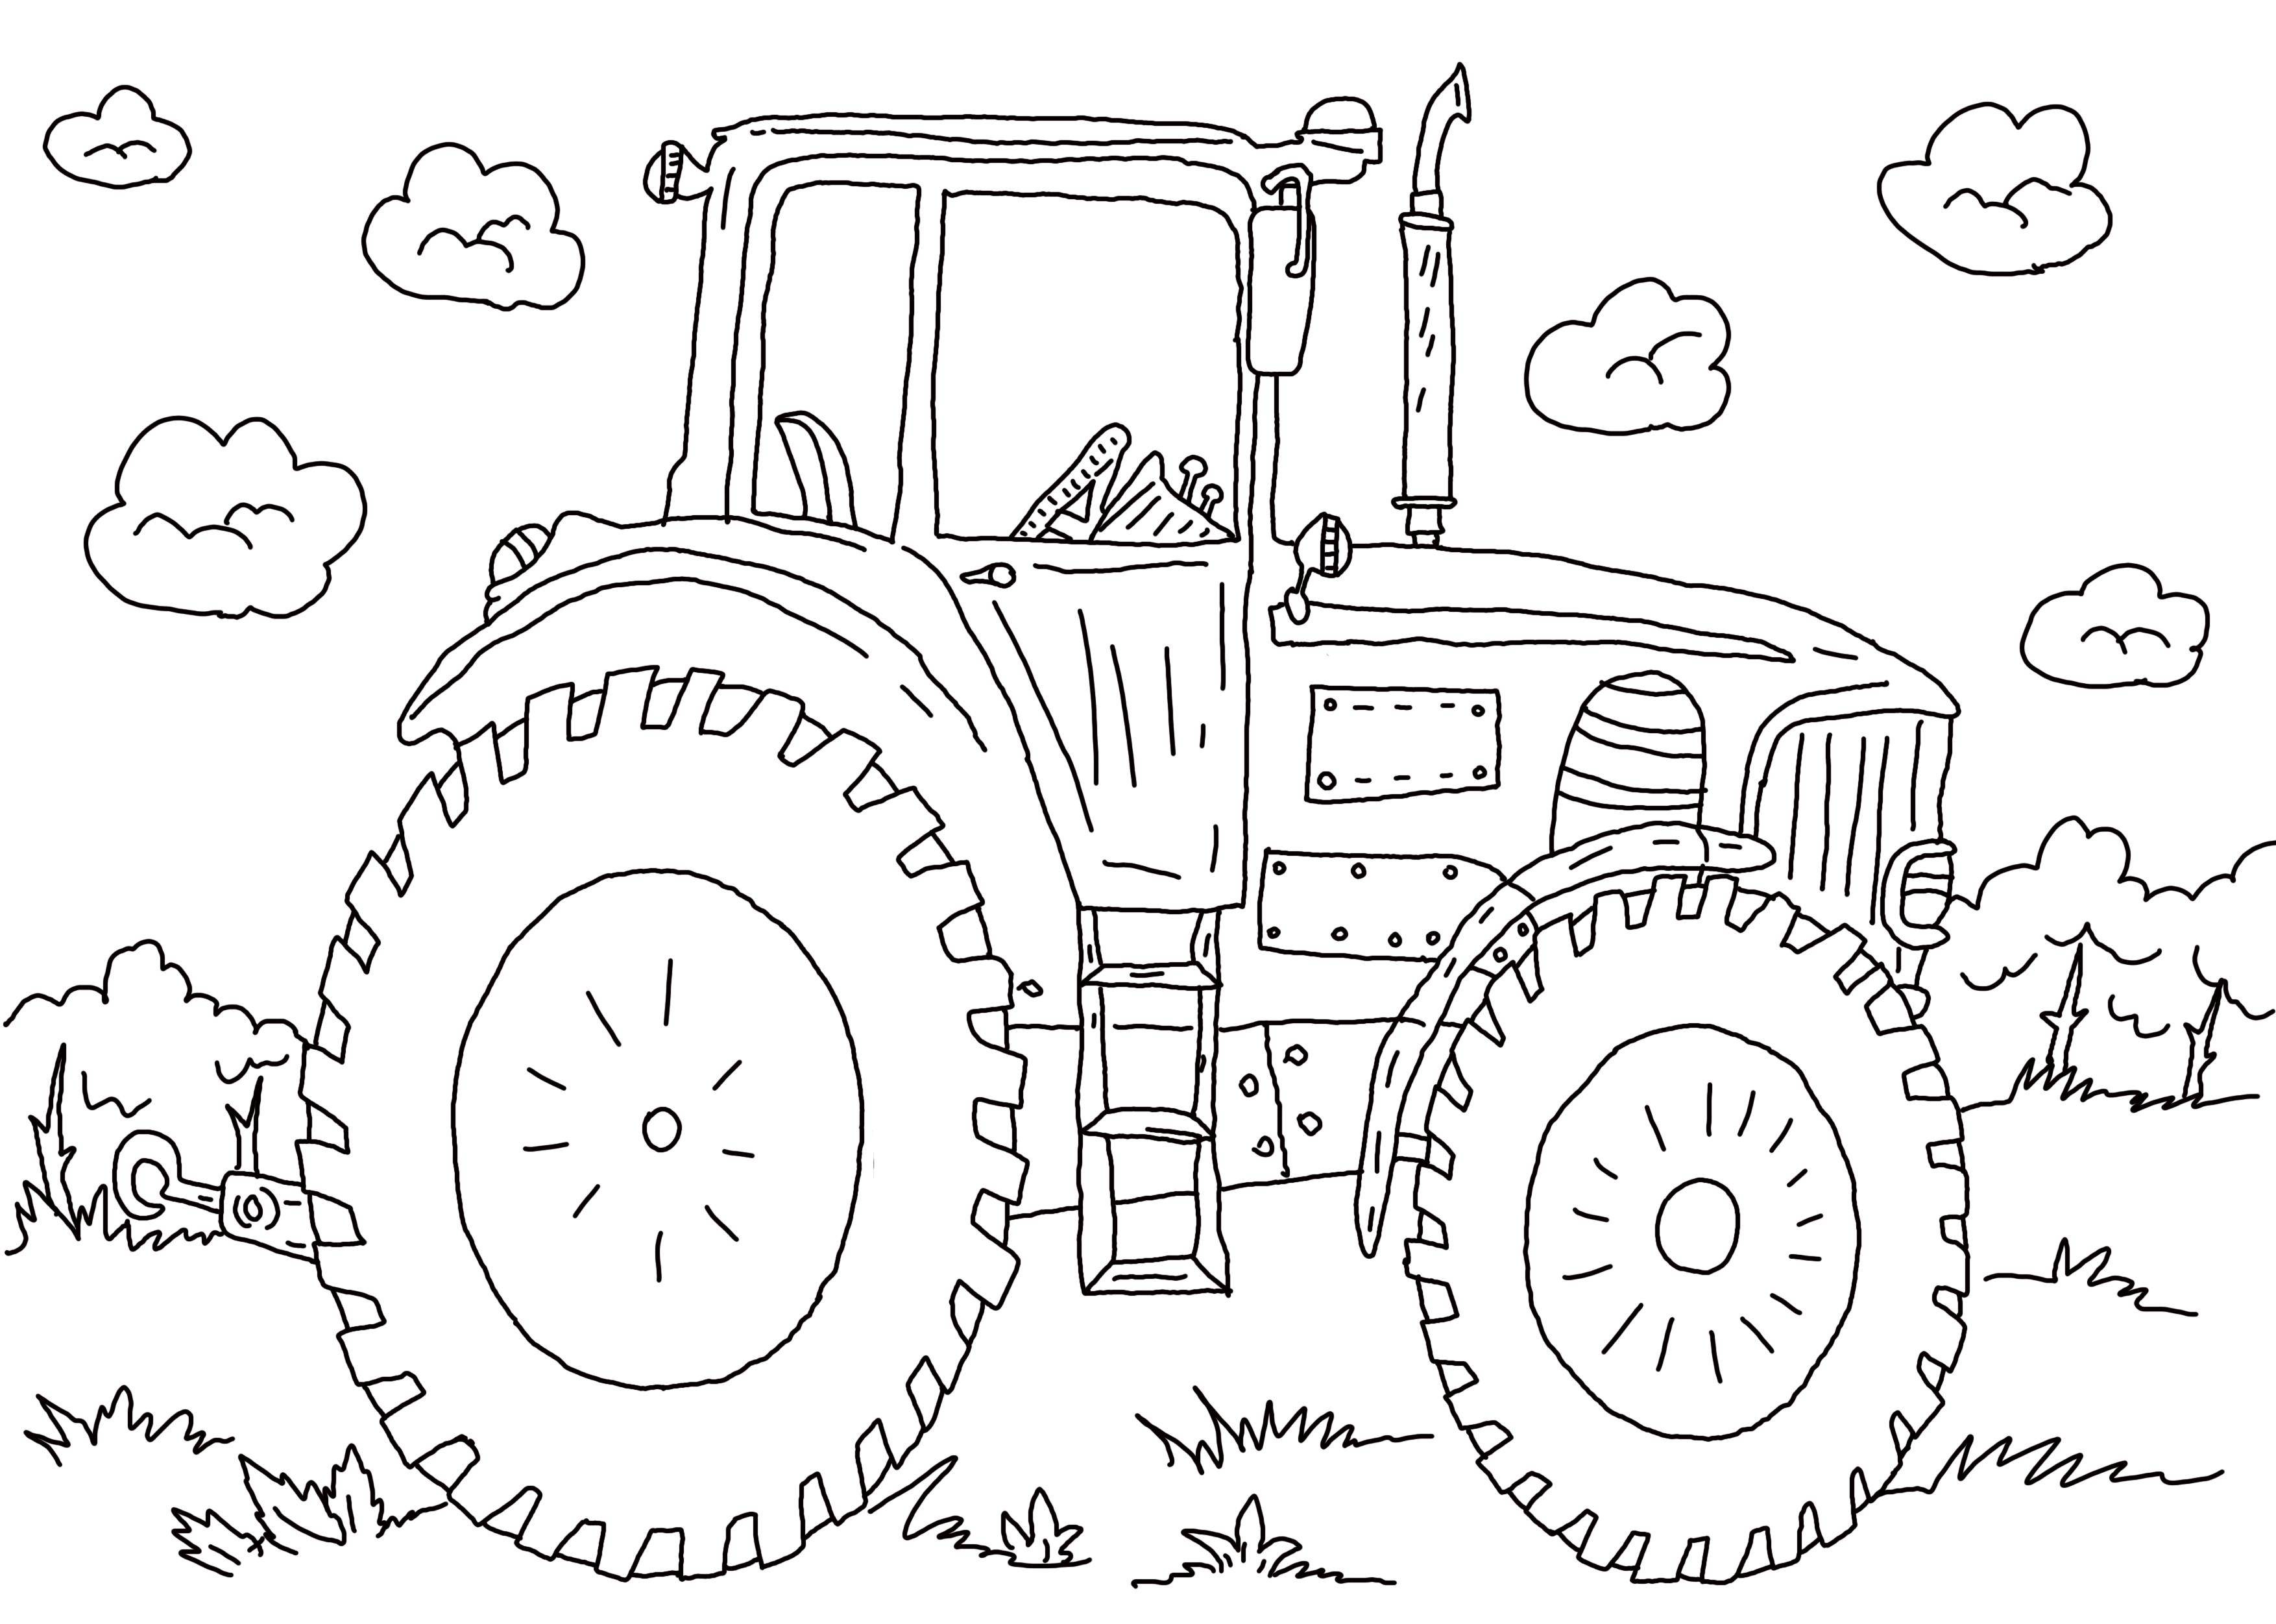 Coloring Tractor in a field. Category transportation. Tags:  tractor, field, wheels.